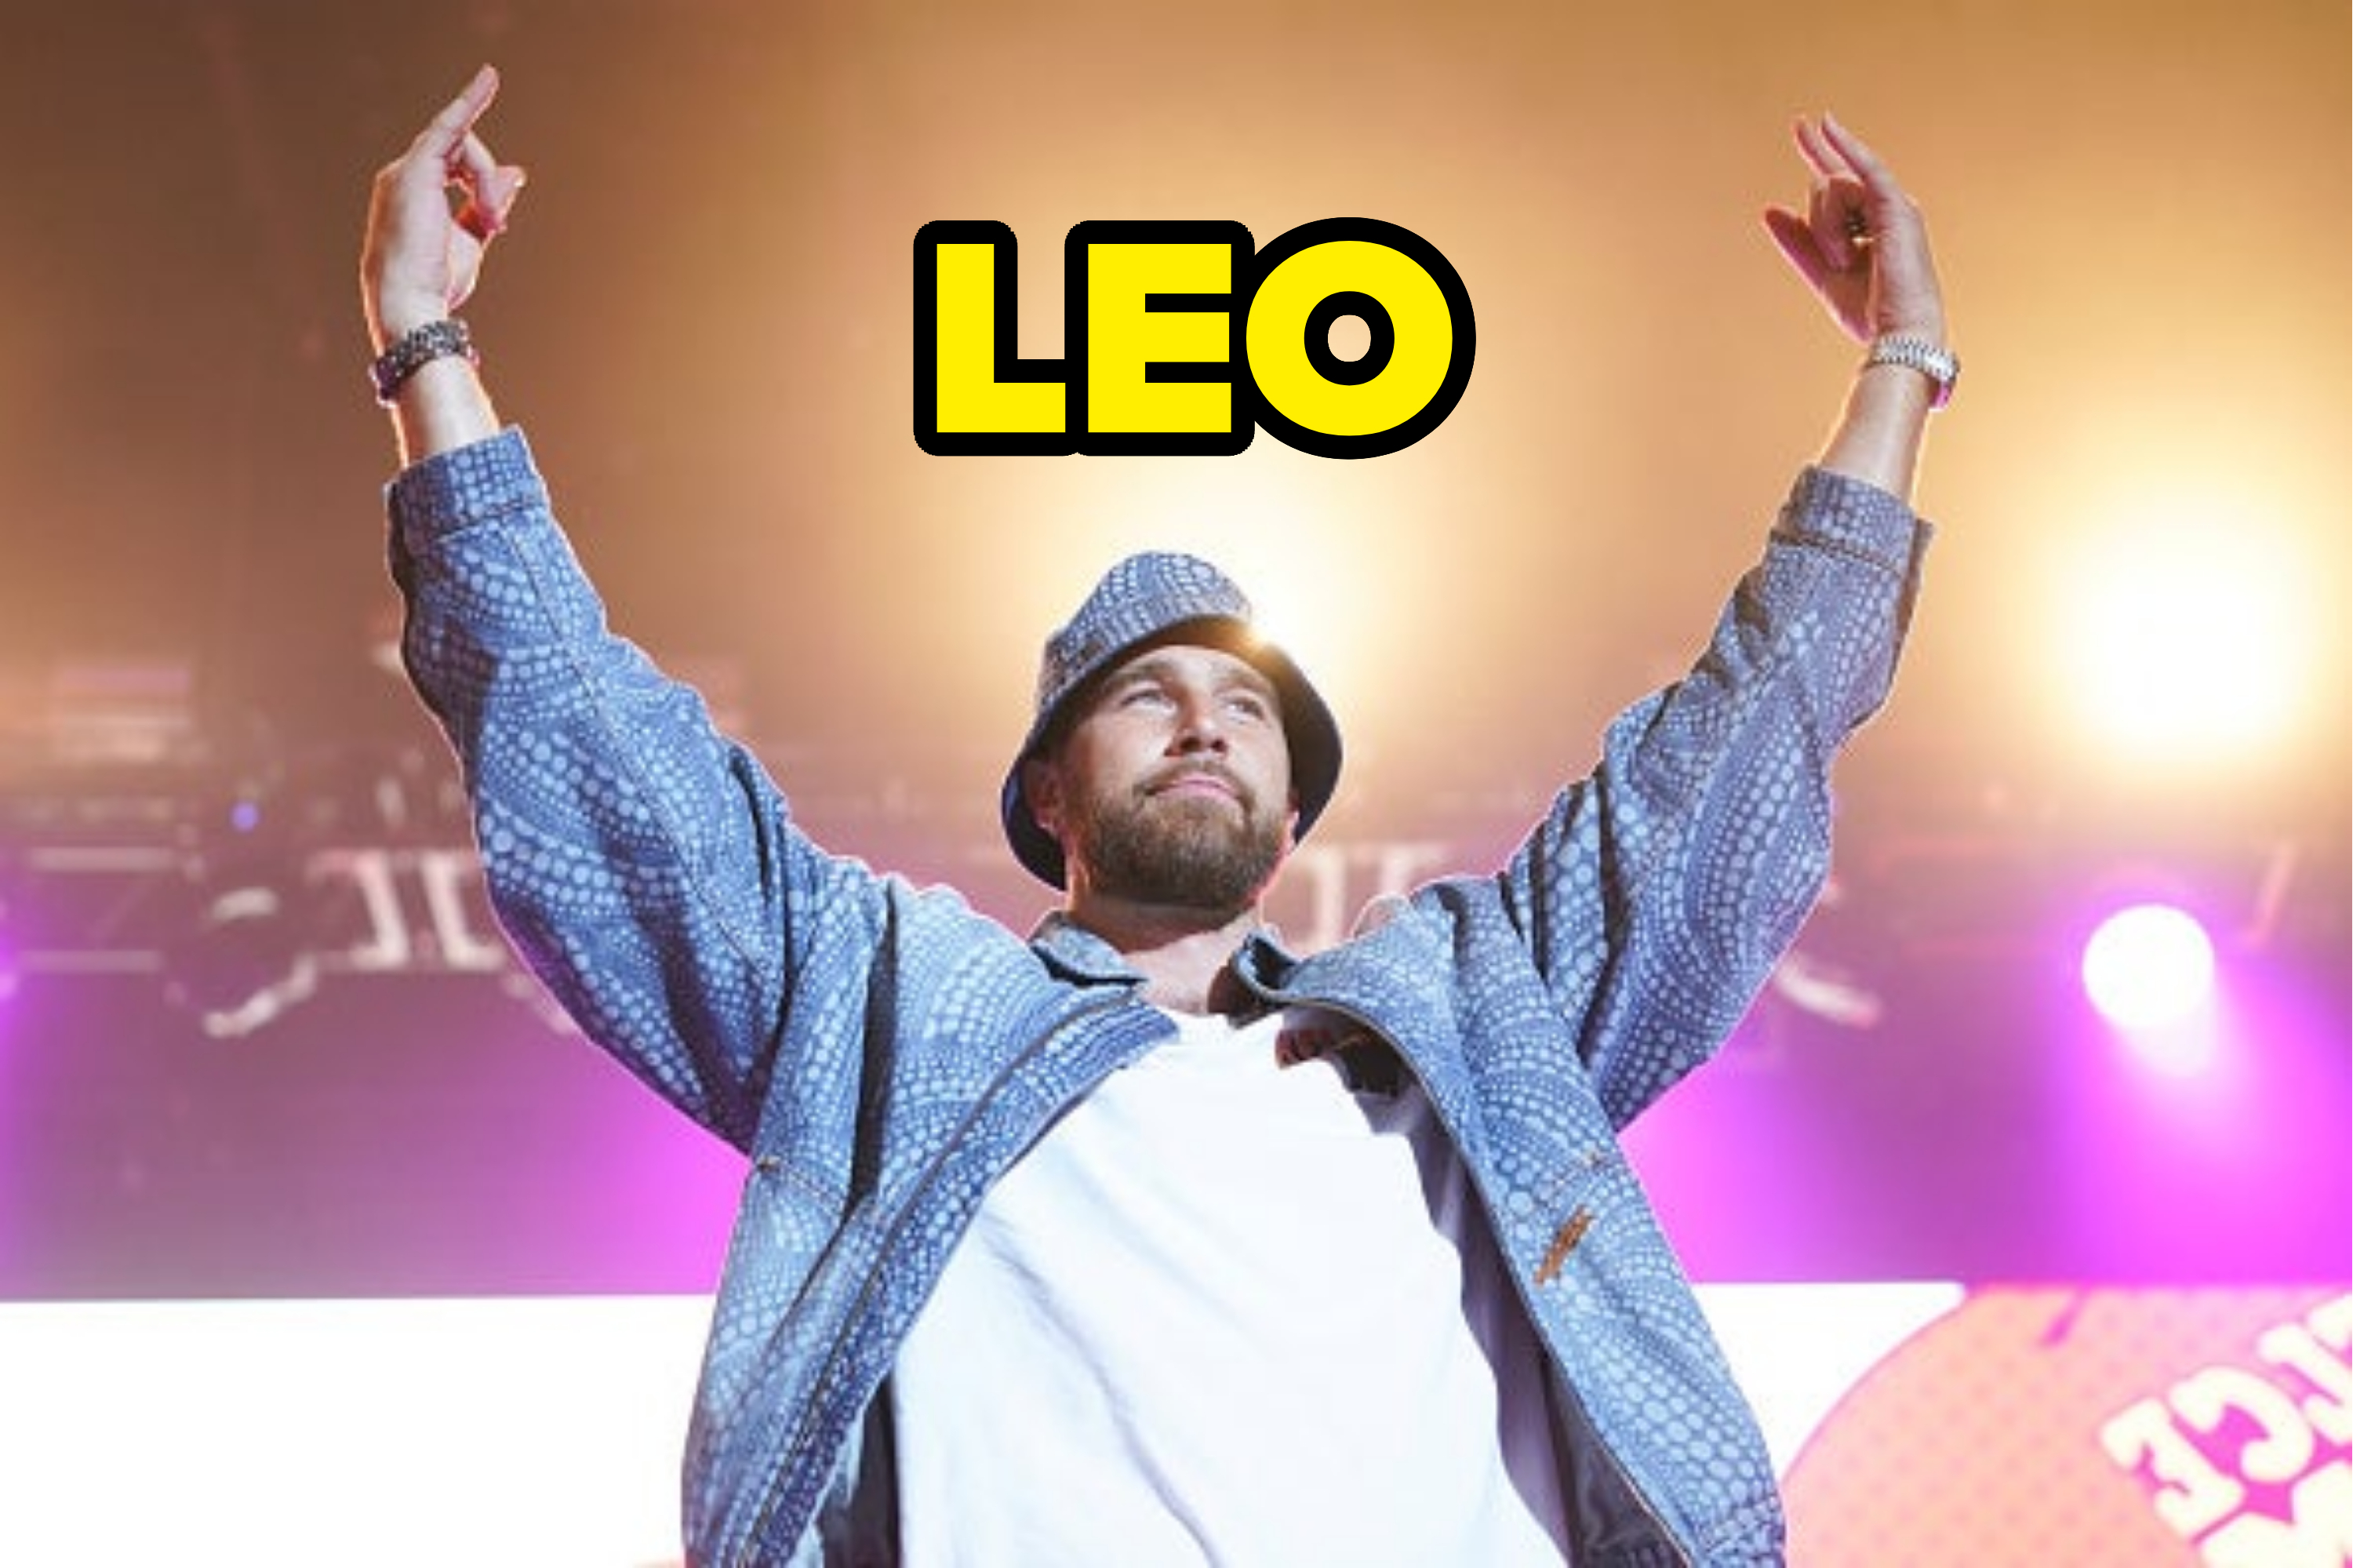 him throwing his hands up in front of a crowd with the text leo